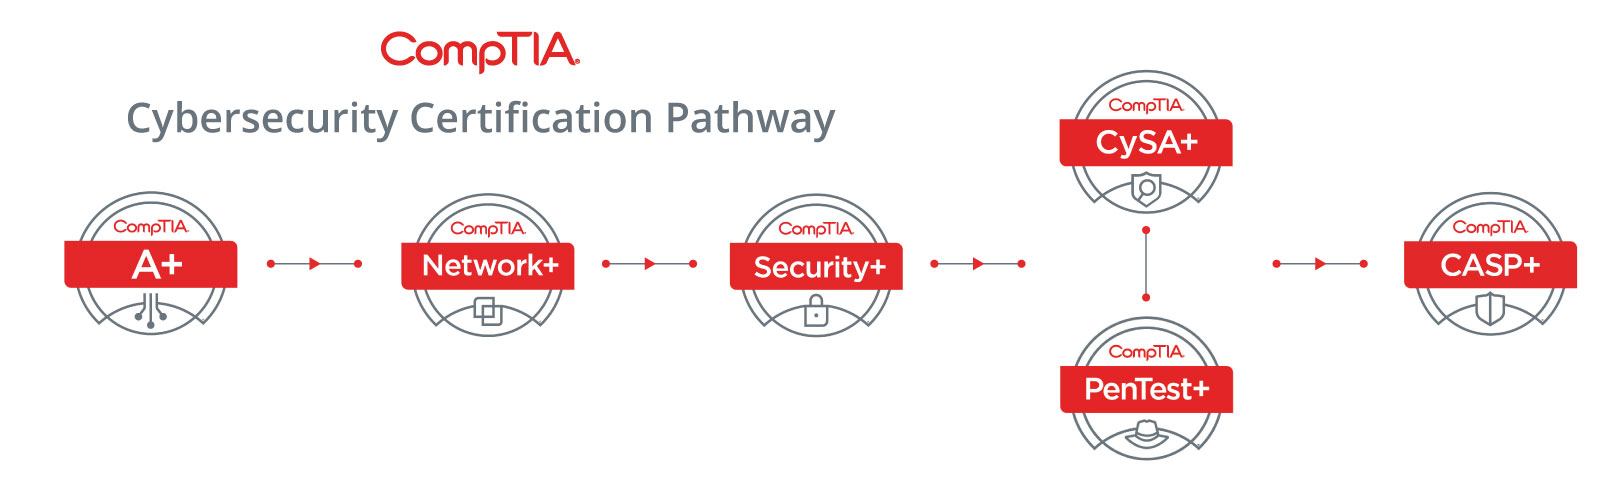 Comptia Cybersecurity Certification Pathway